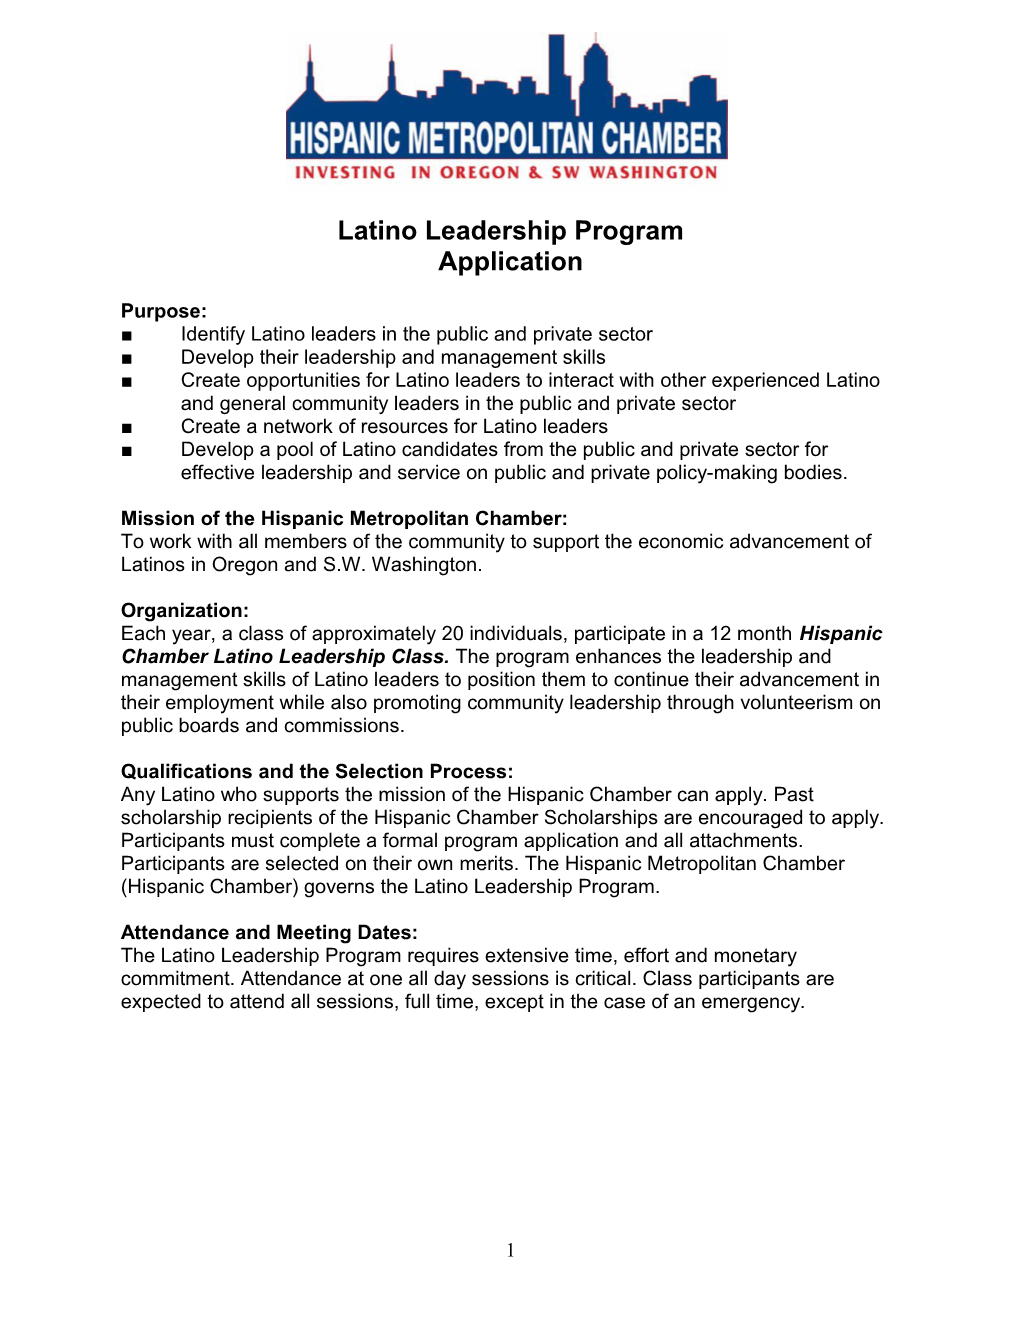 Identify Latino Leaders in the Public and Private Sector